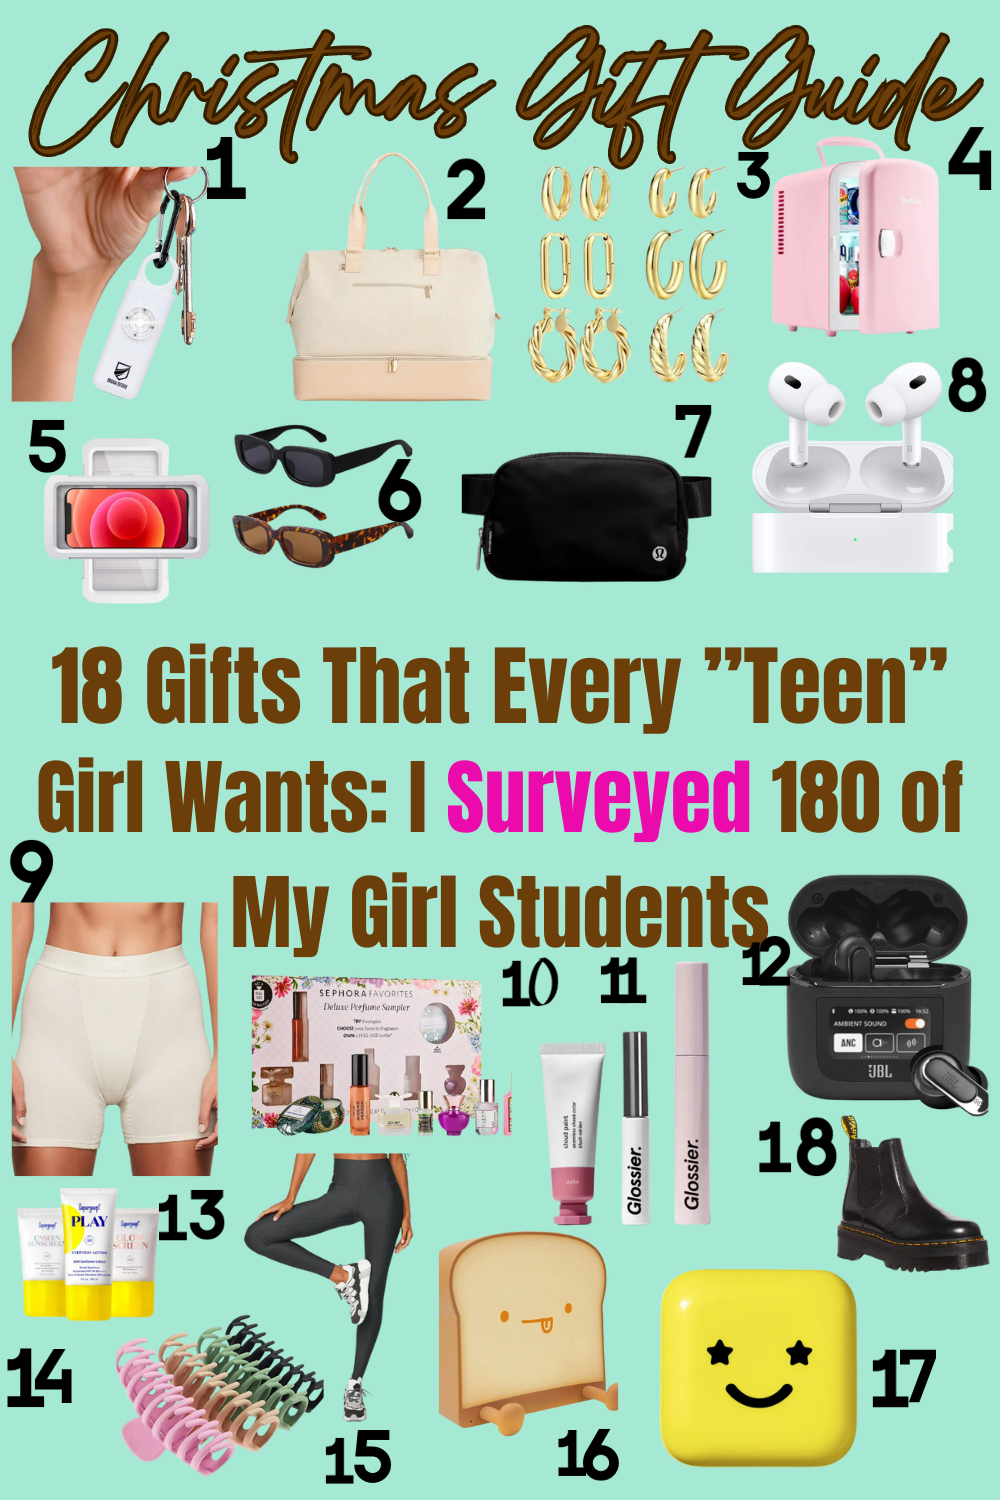 Best Gifts for Teen Girls  Christmas gifts for teen girls, Teen christmas  gifts, Cool gifts for teens